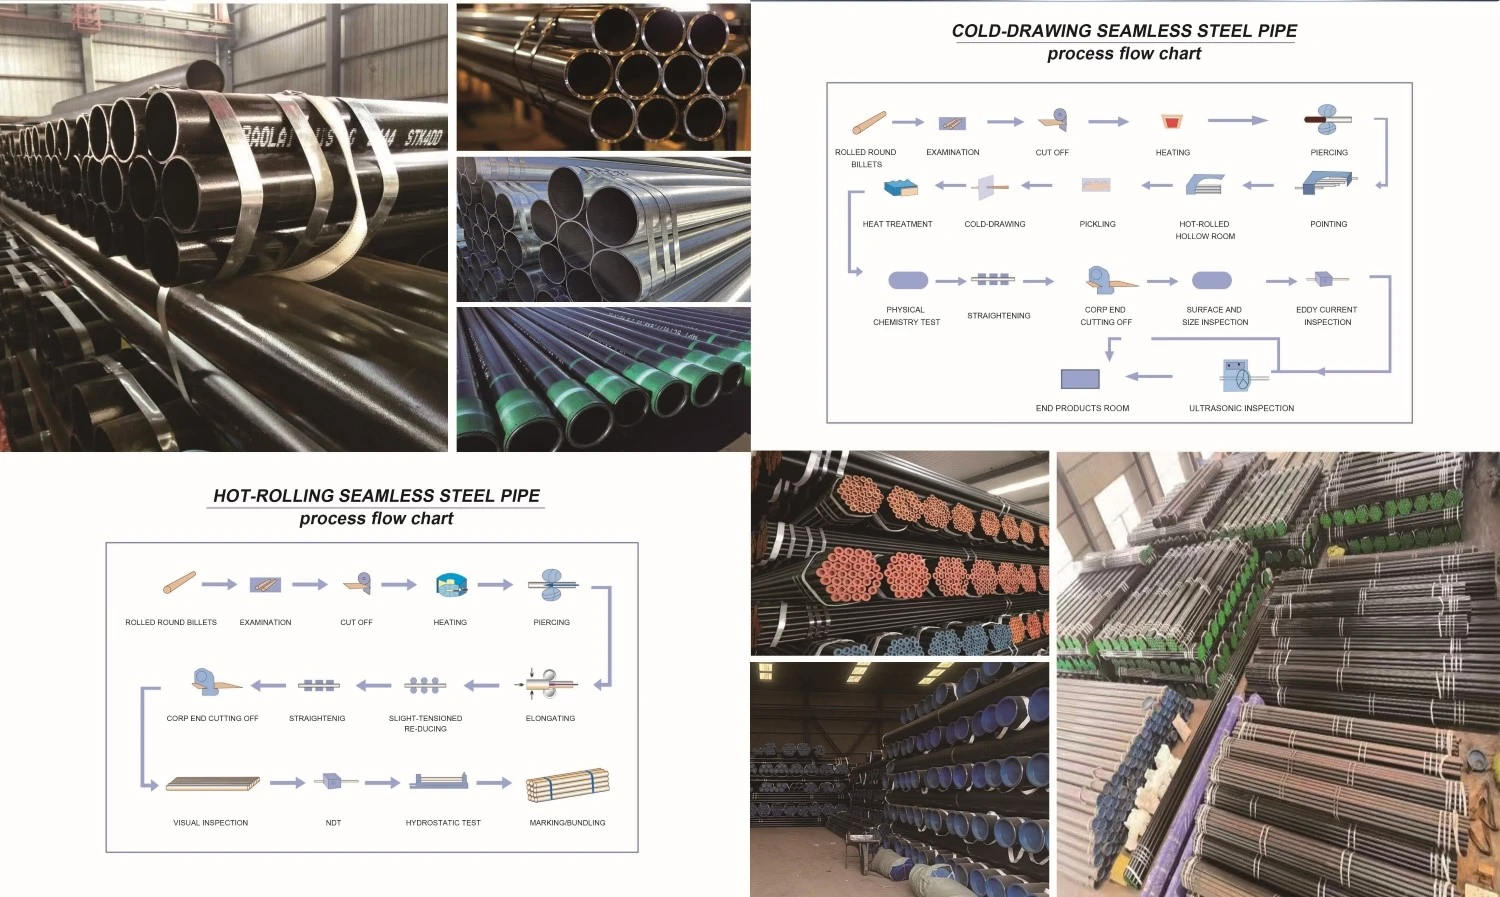 China ASTM A106 seamless pipe manufacturing process